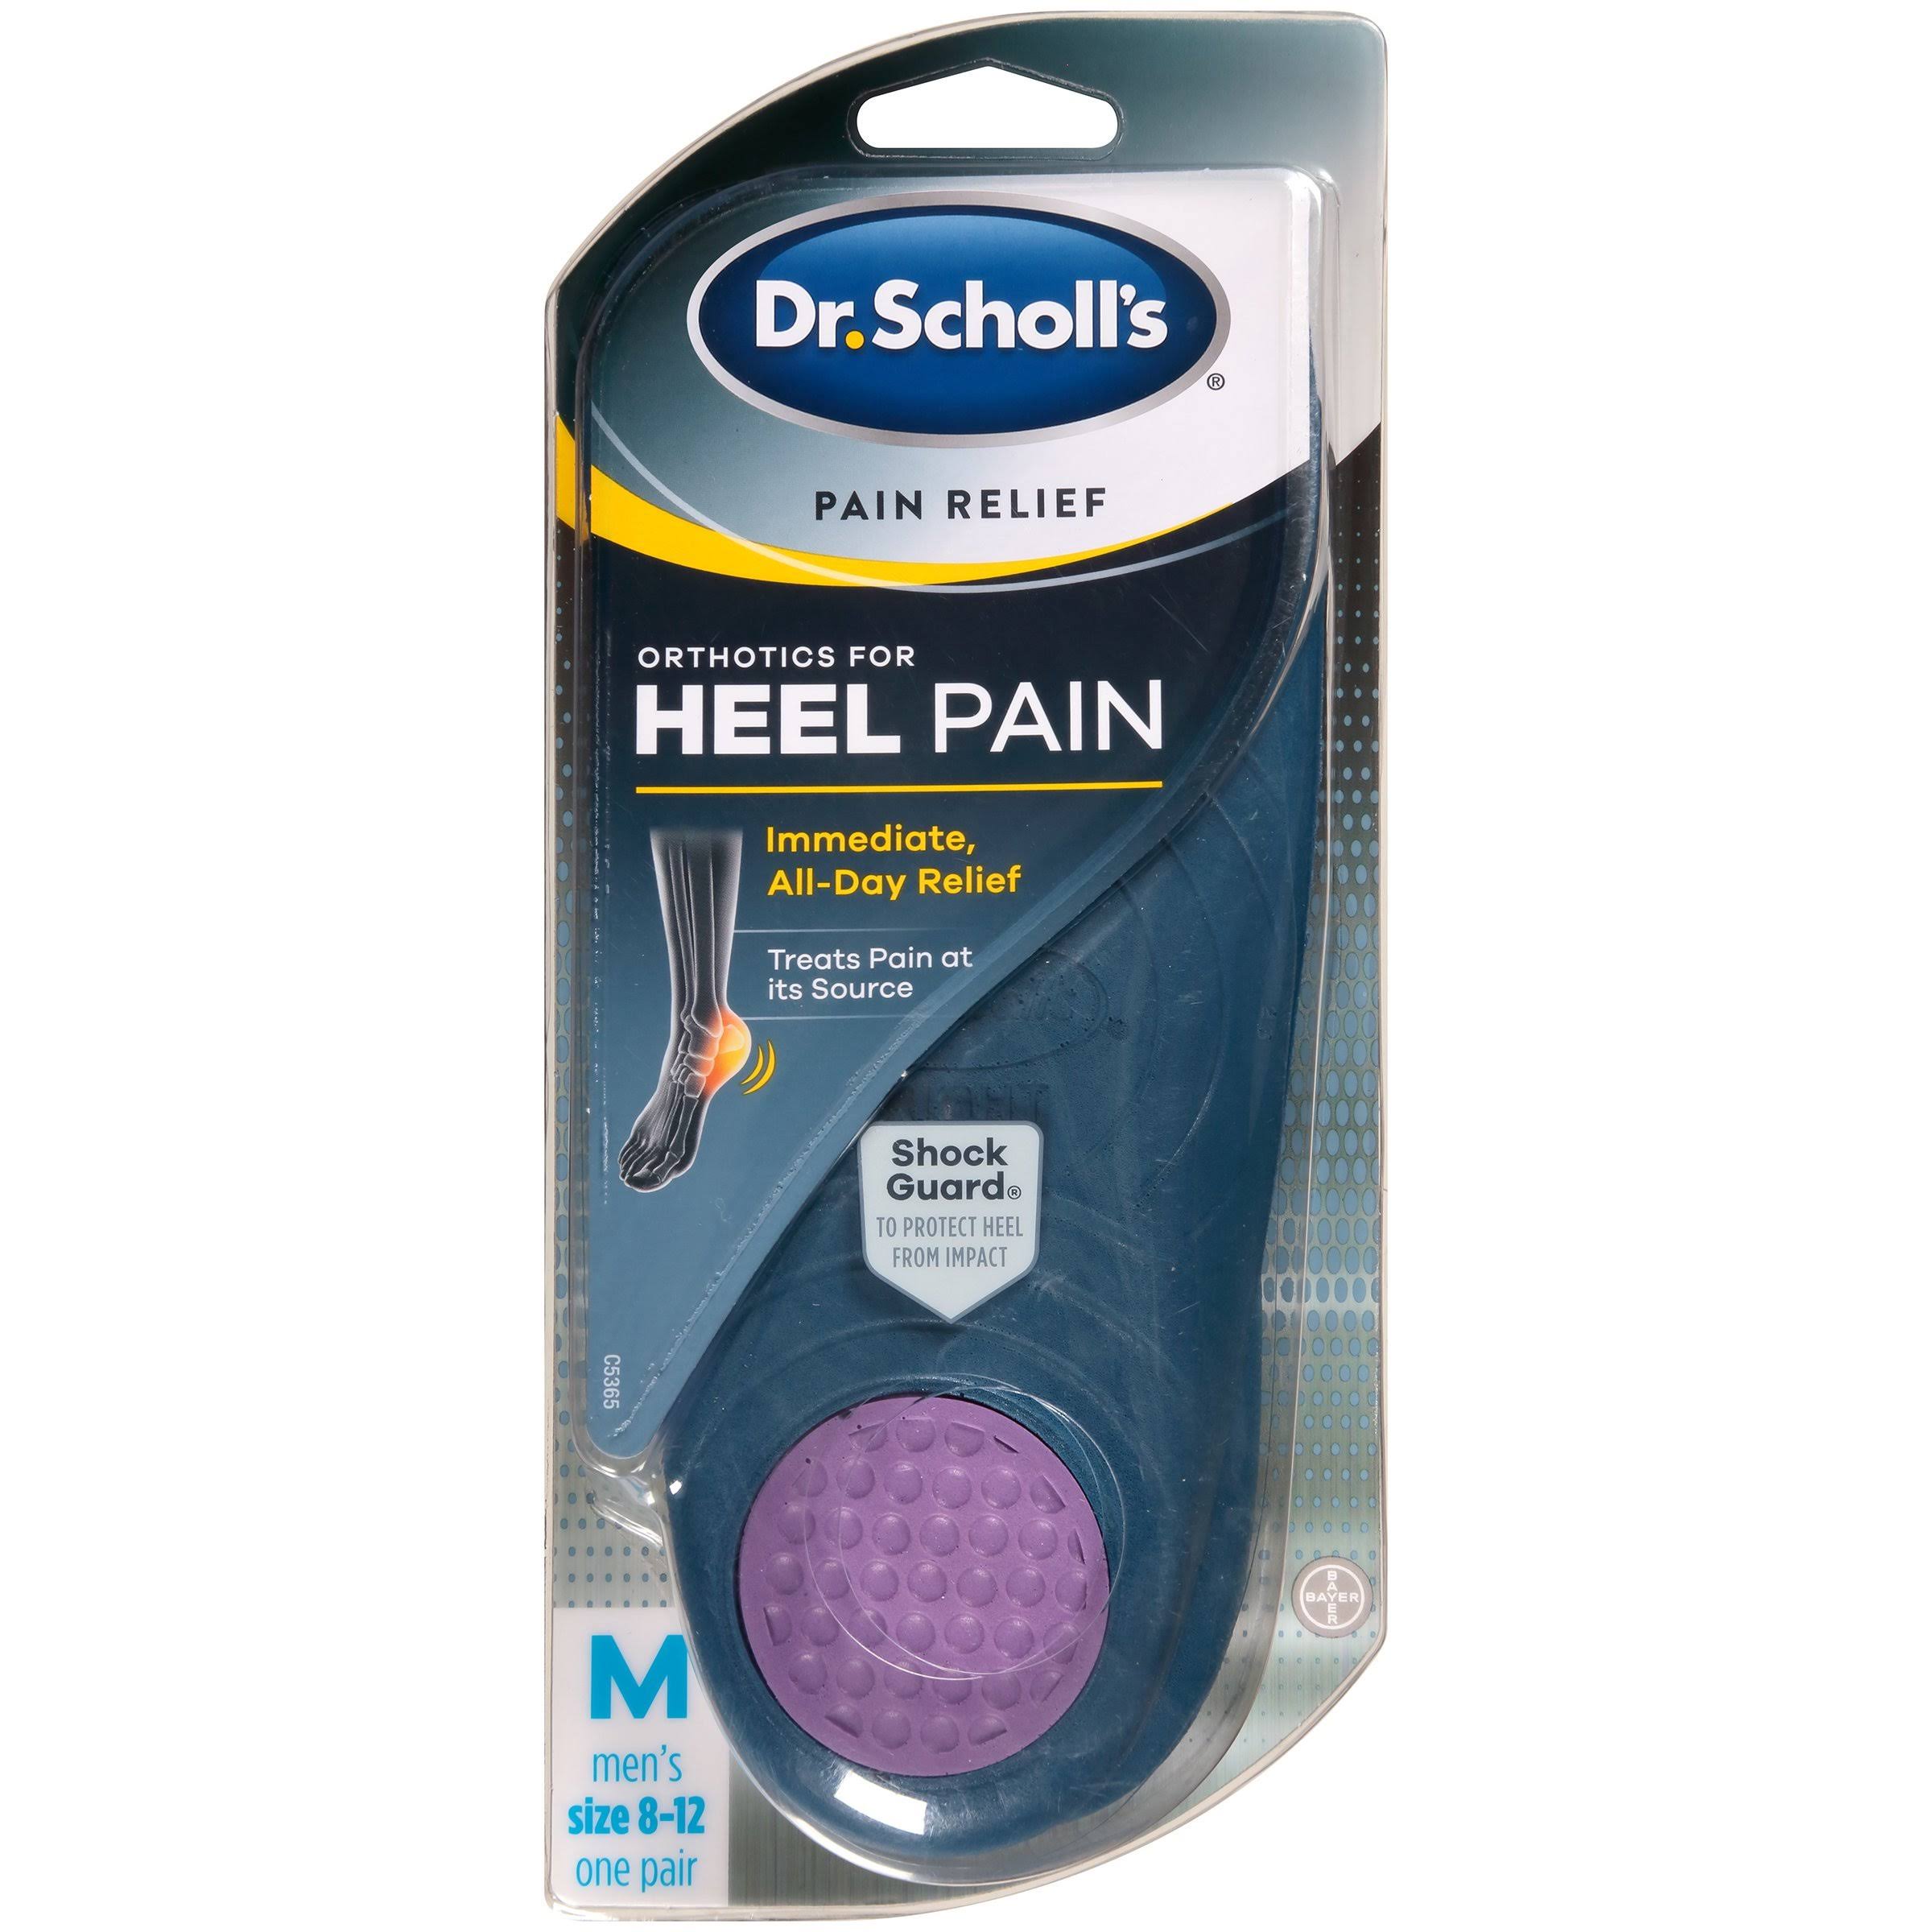 Dr. Scholl's Men's Pain Relief Orthotics for Heel Pain Insoles - Size 8-12, 1 Pair